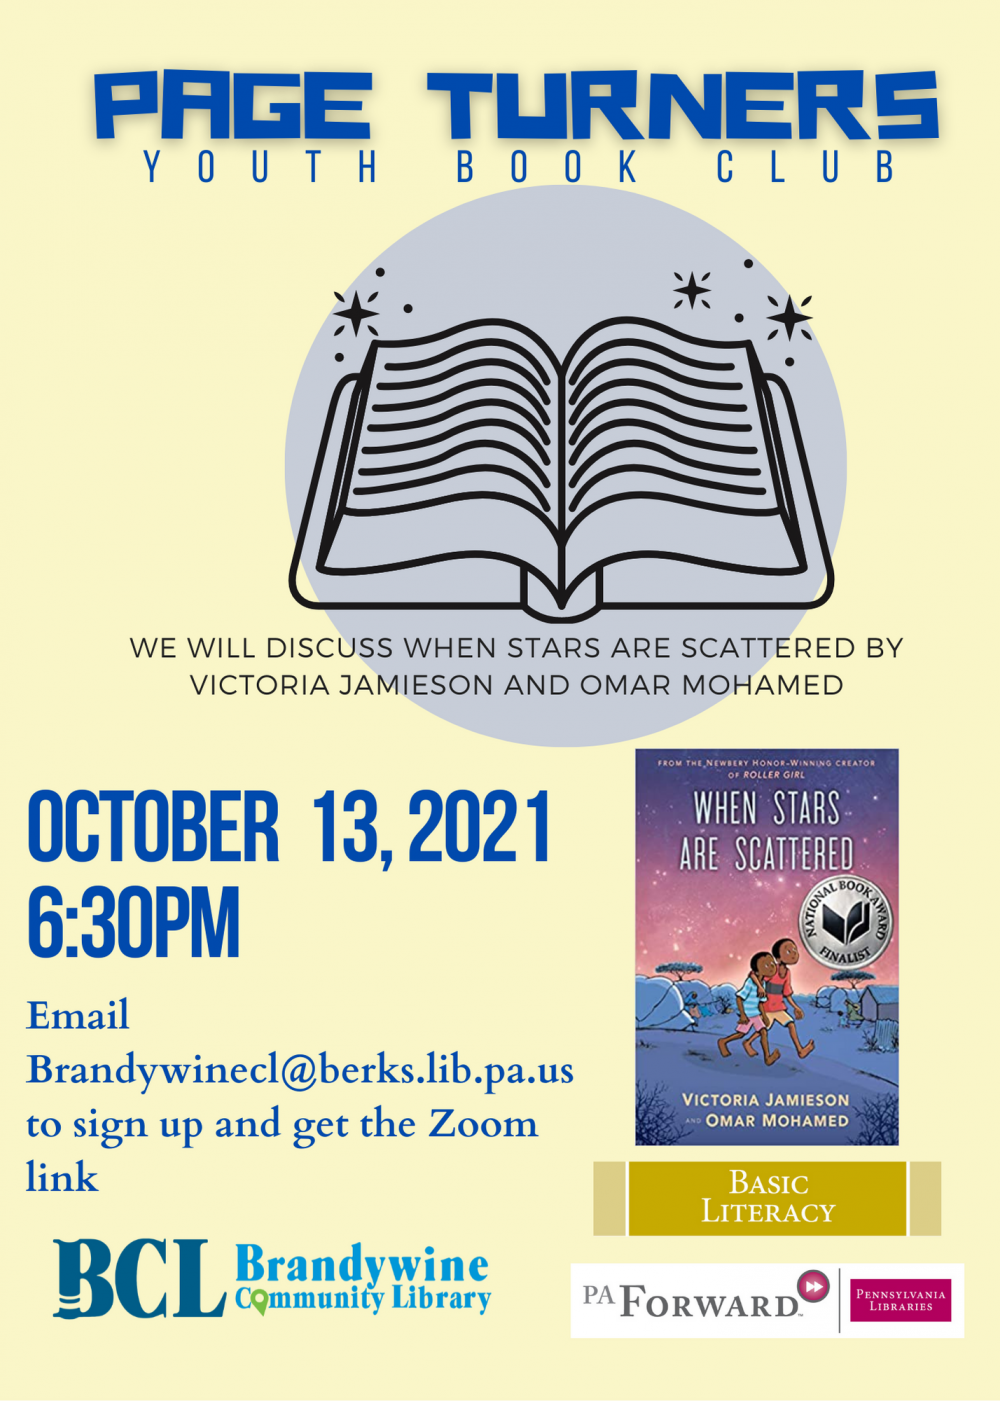 page turners youth book club flyer